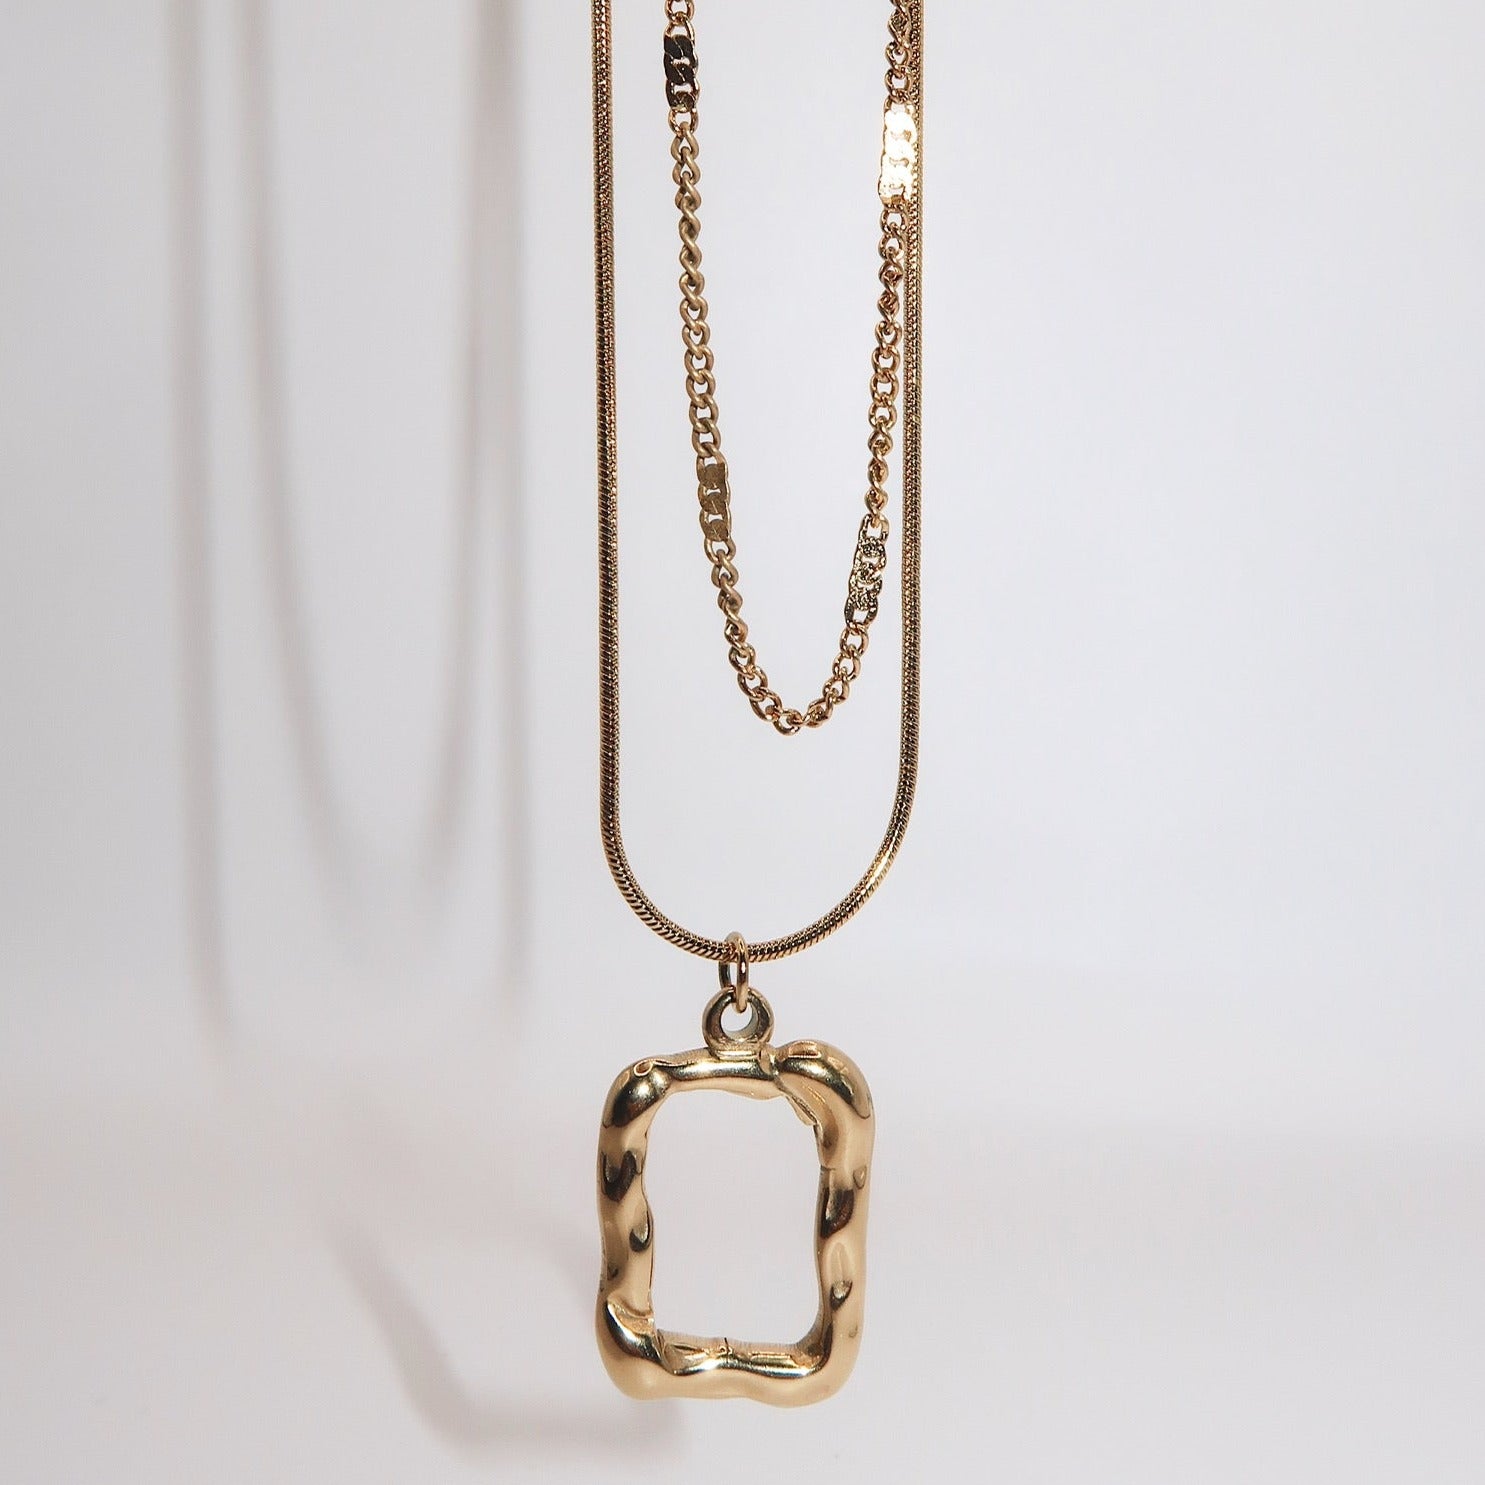 ALANAH - 18K PVD Gold Plated Double Layered Necklace w/Rectangular Pendant - Mixed Metals